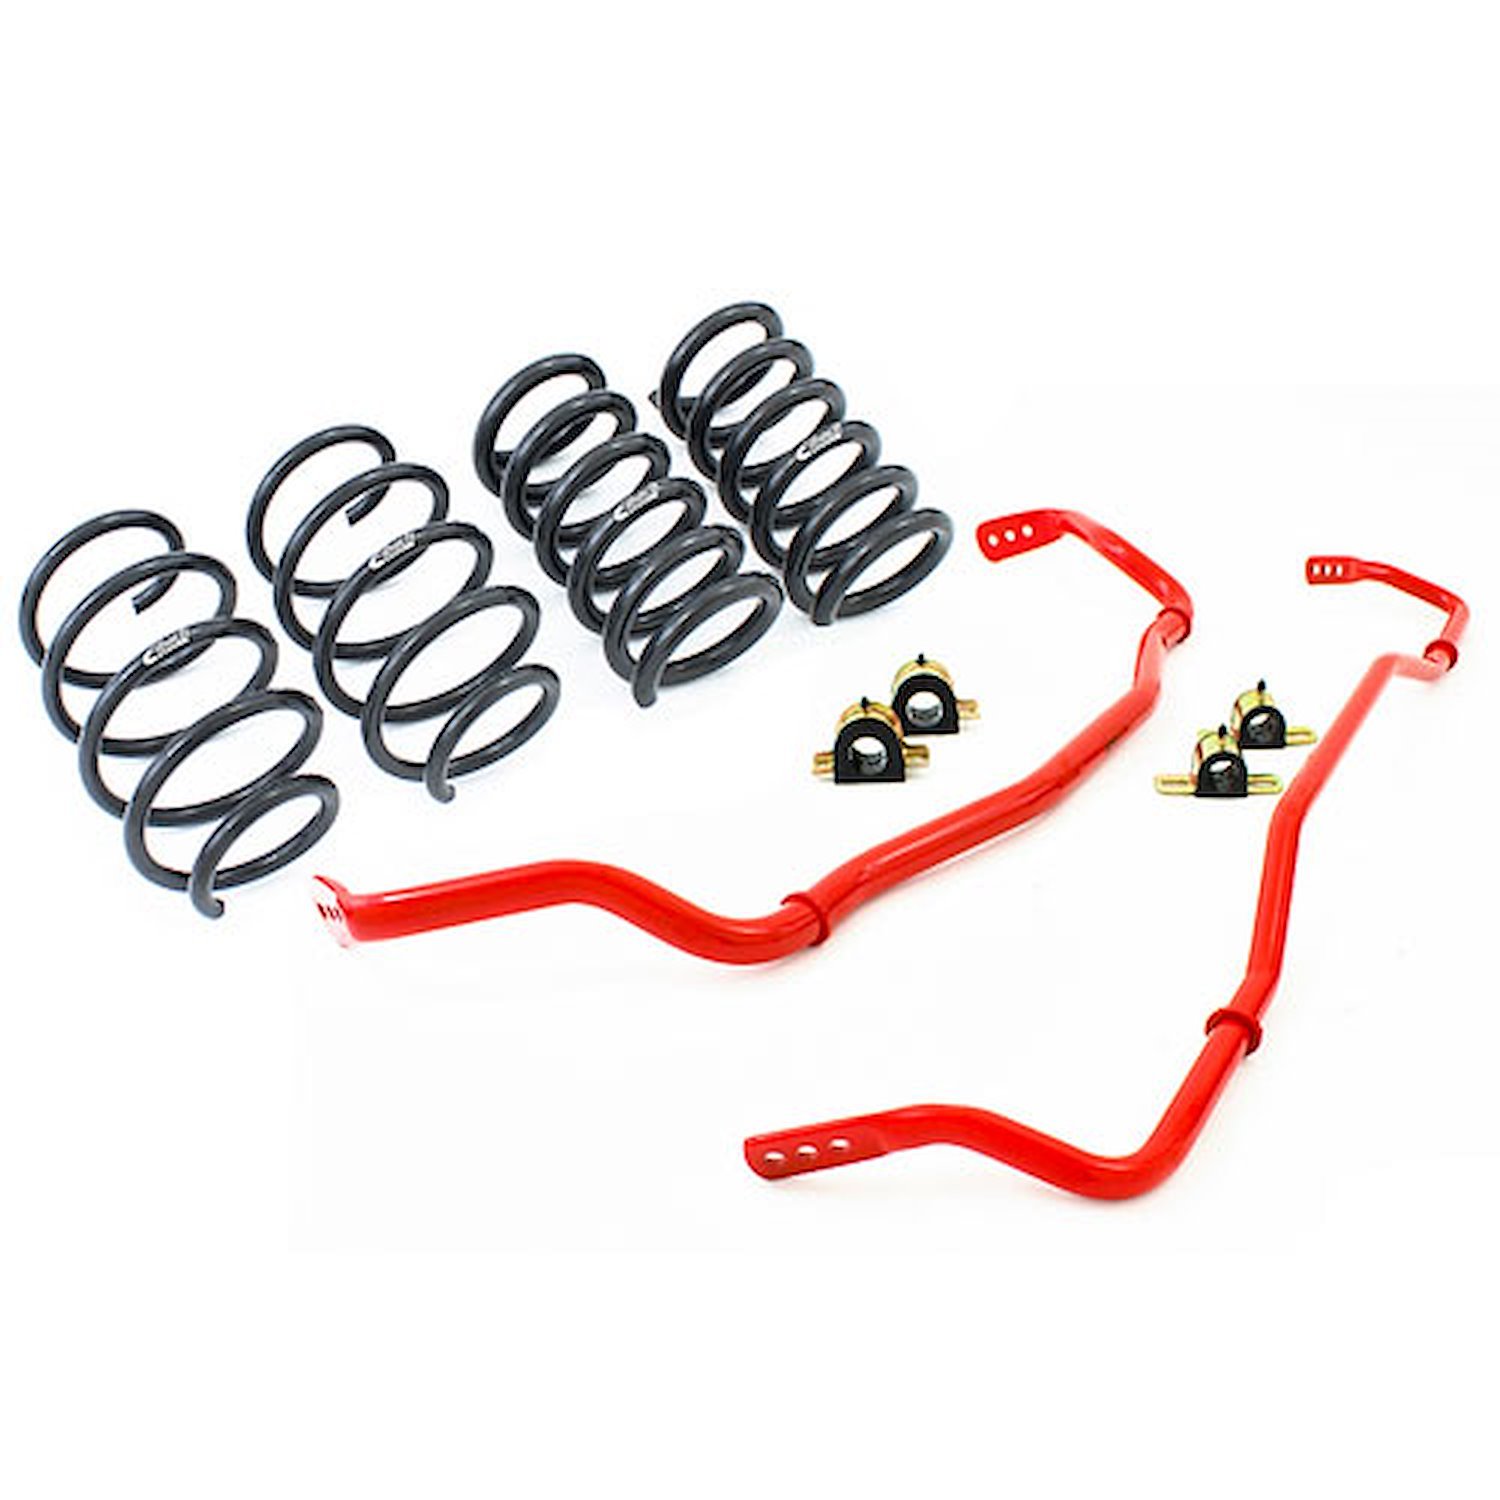 35145.880 Pro-System-Plus Suspension Kit 2015-16 Ford Mustang GT - 1" Front/Rear Drop